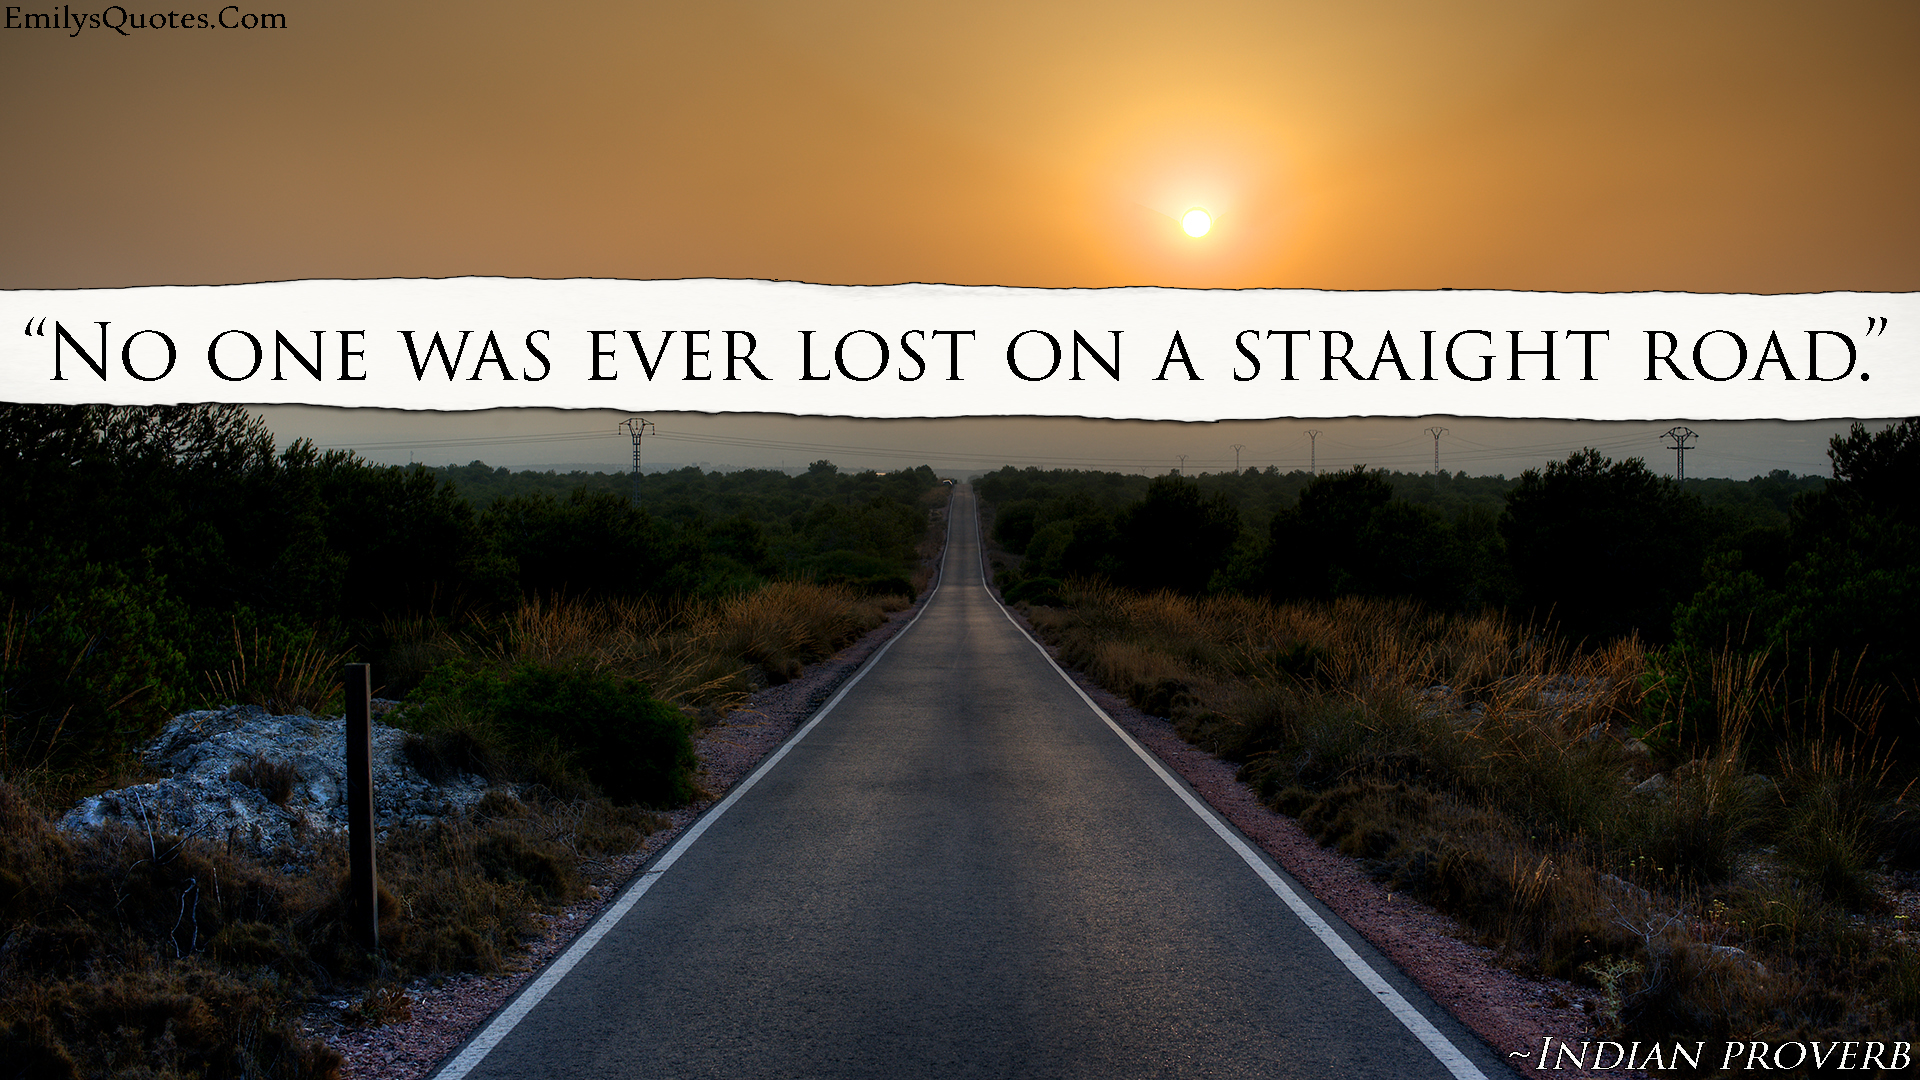 No one was ever lost on a straight road